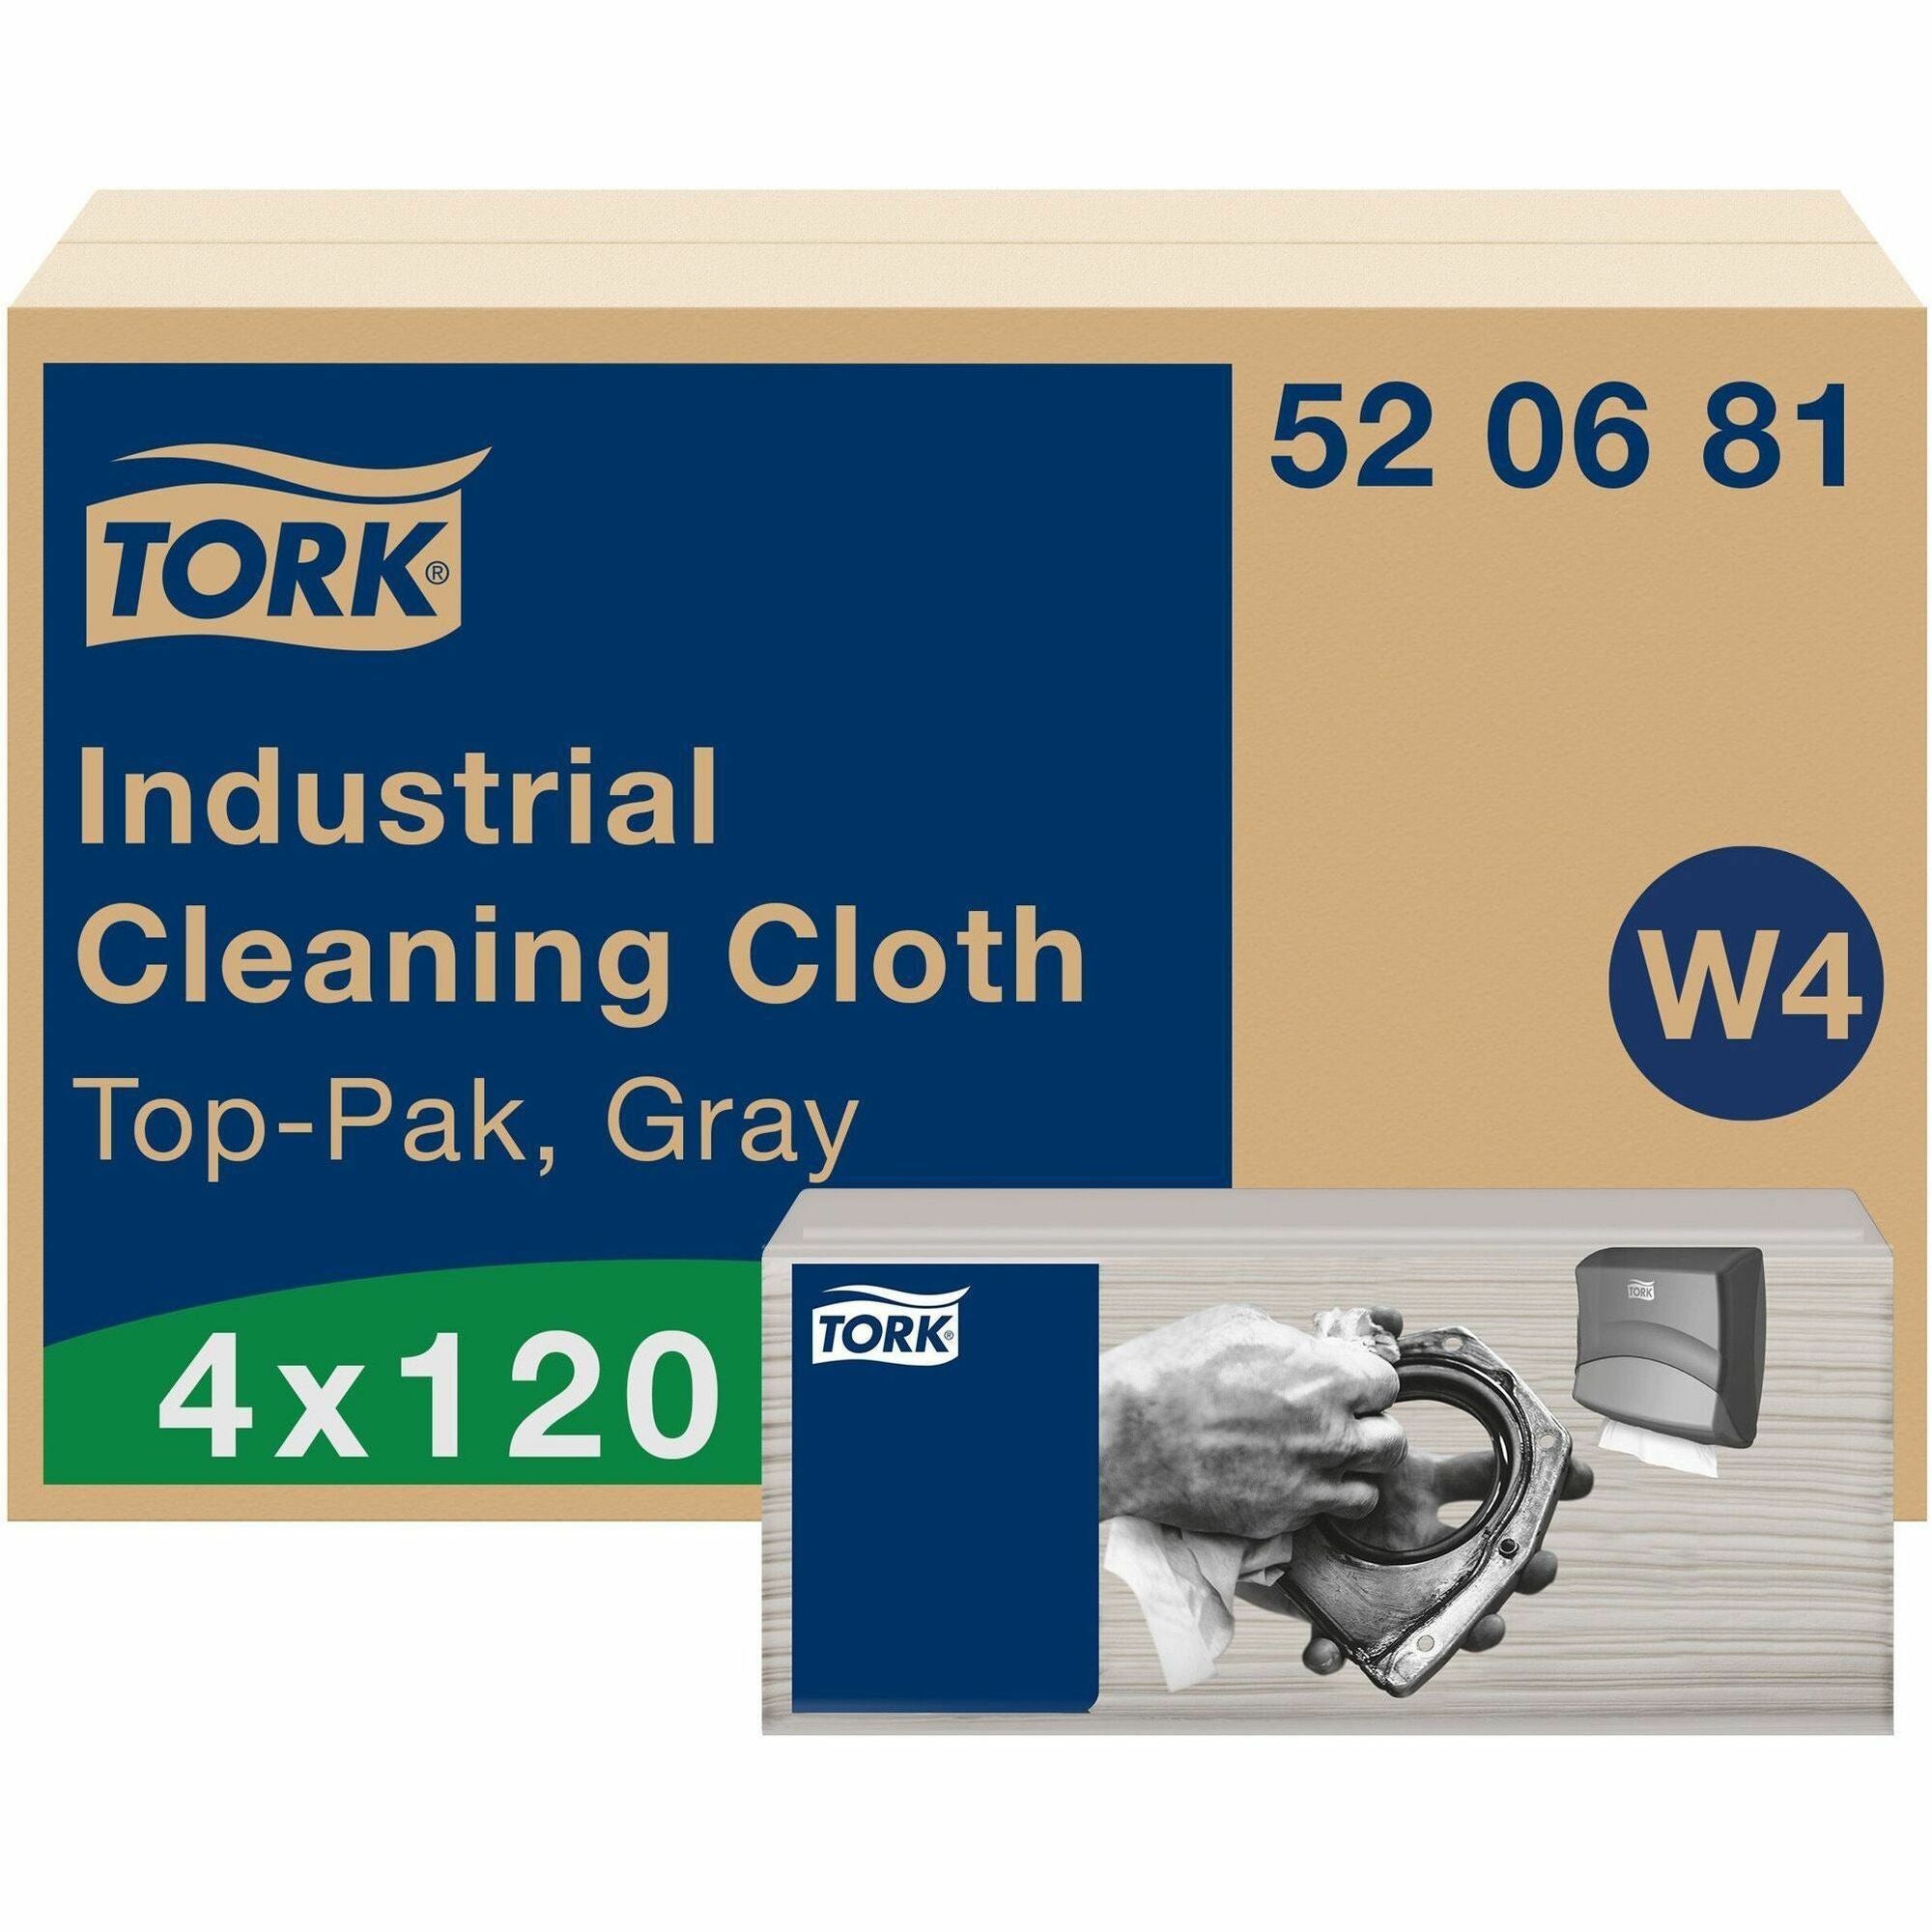 tork-industrial-cleaning-cloth-gray-w4-1-ply-1398-x-1634-gray-cellulose-polyester-polypropylene-soft-flexible-disposable-absorbent-non-scratching-embossed-for-multipurpose-120-pack_trk520681 - 1